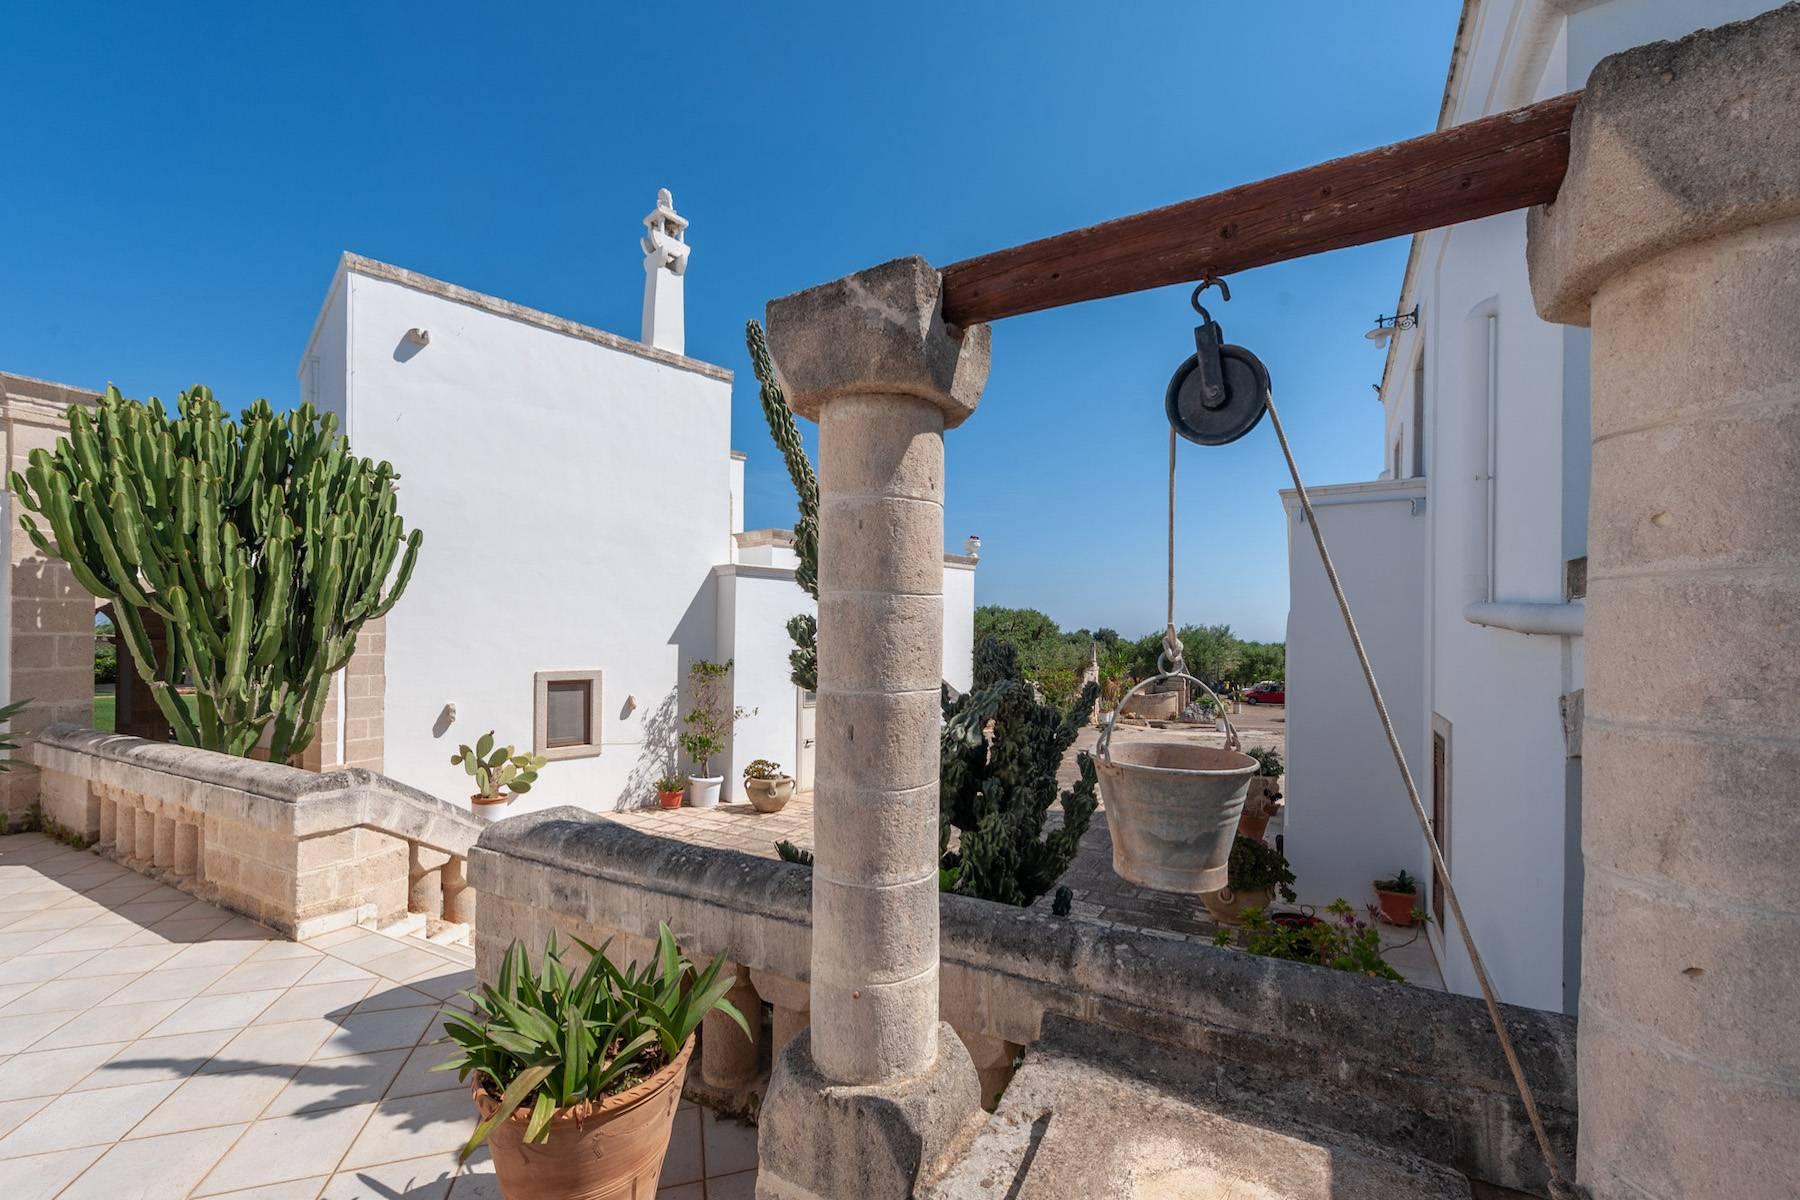 Charming 18th century Masseria surrounded by centuries-old olive trees - 6